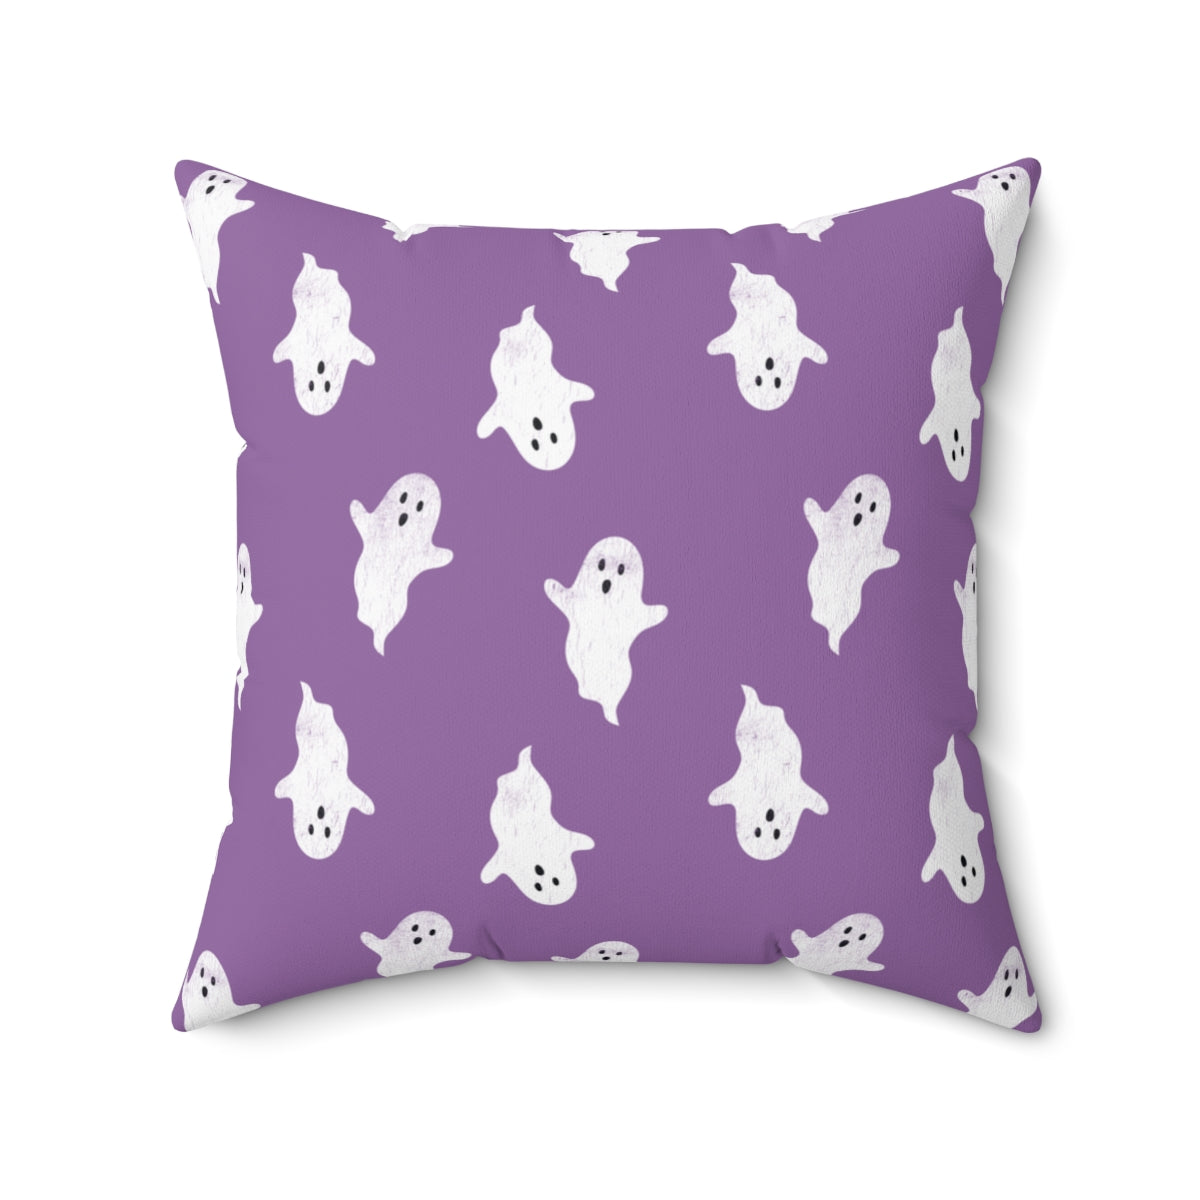 Spookin' Ghosts Pillow Cover / Halloween / Purple